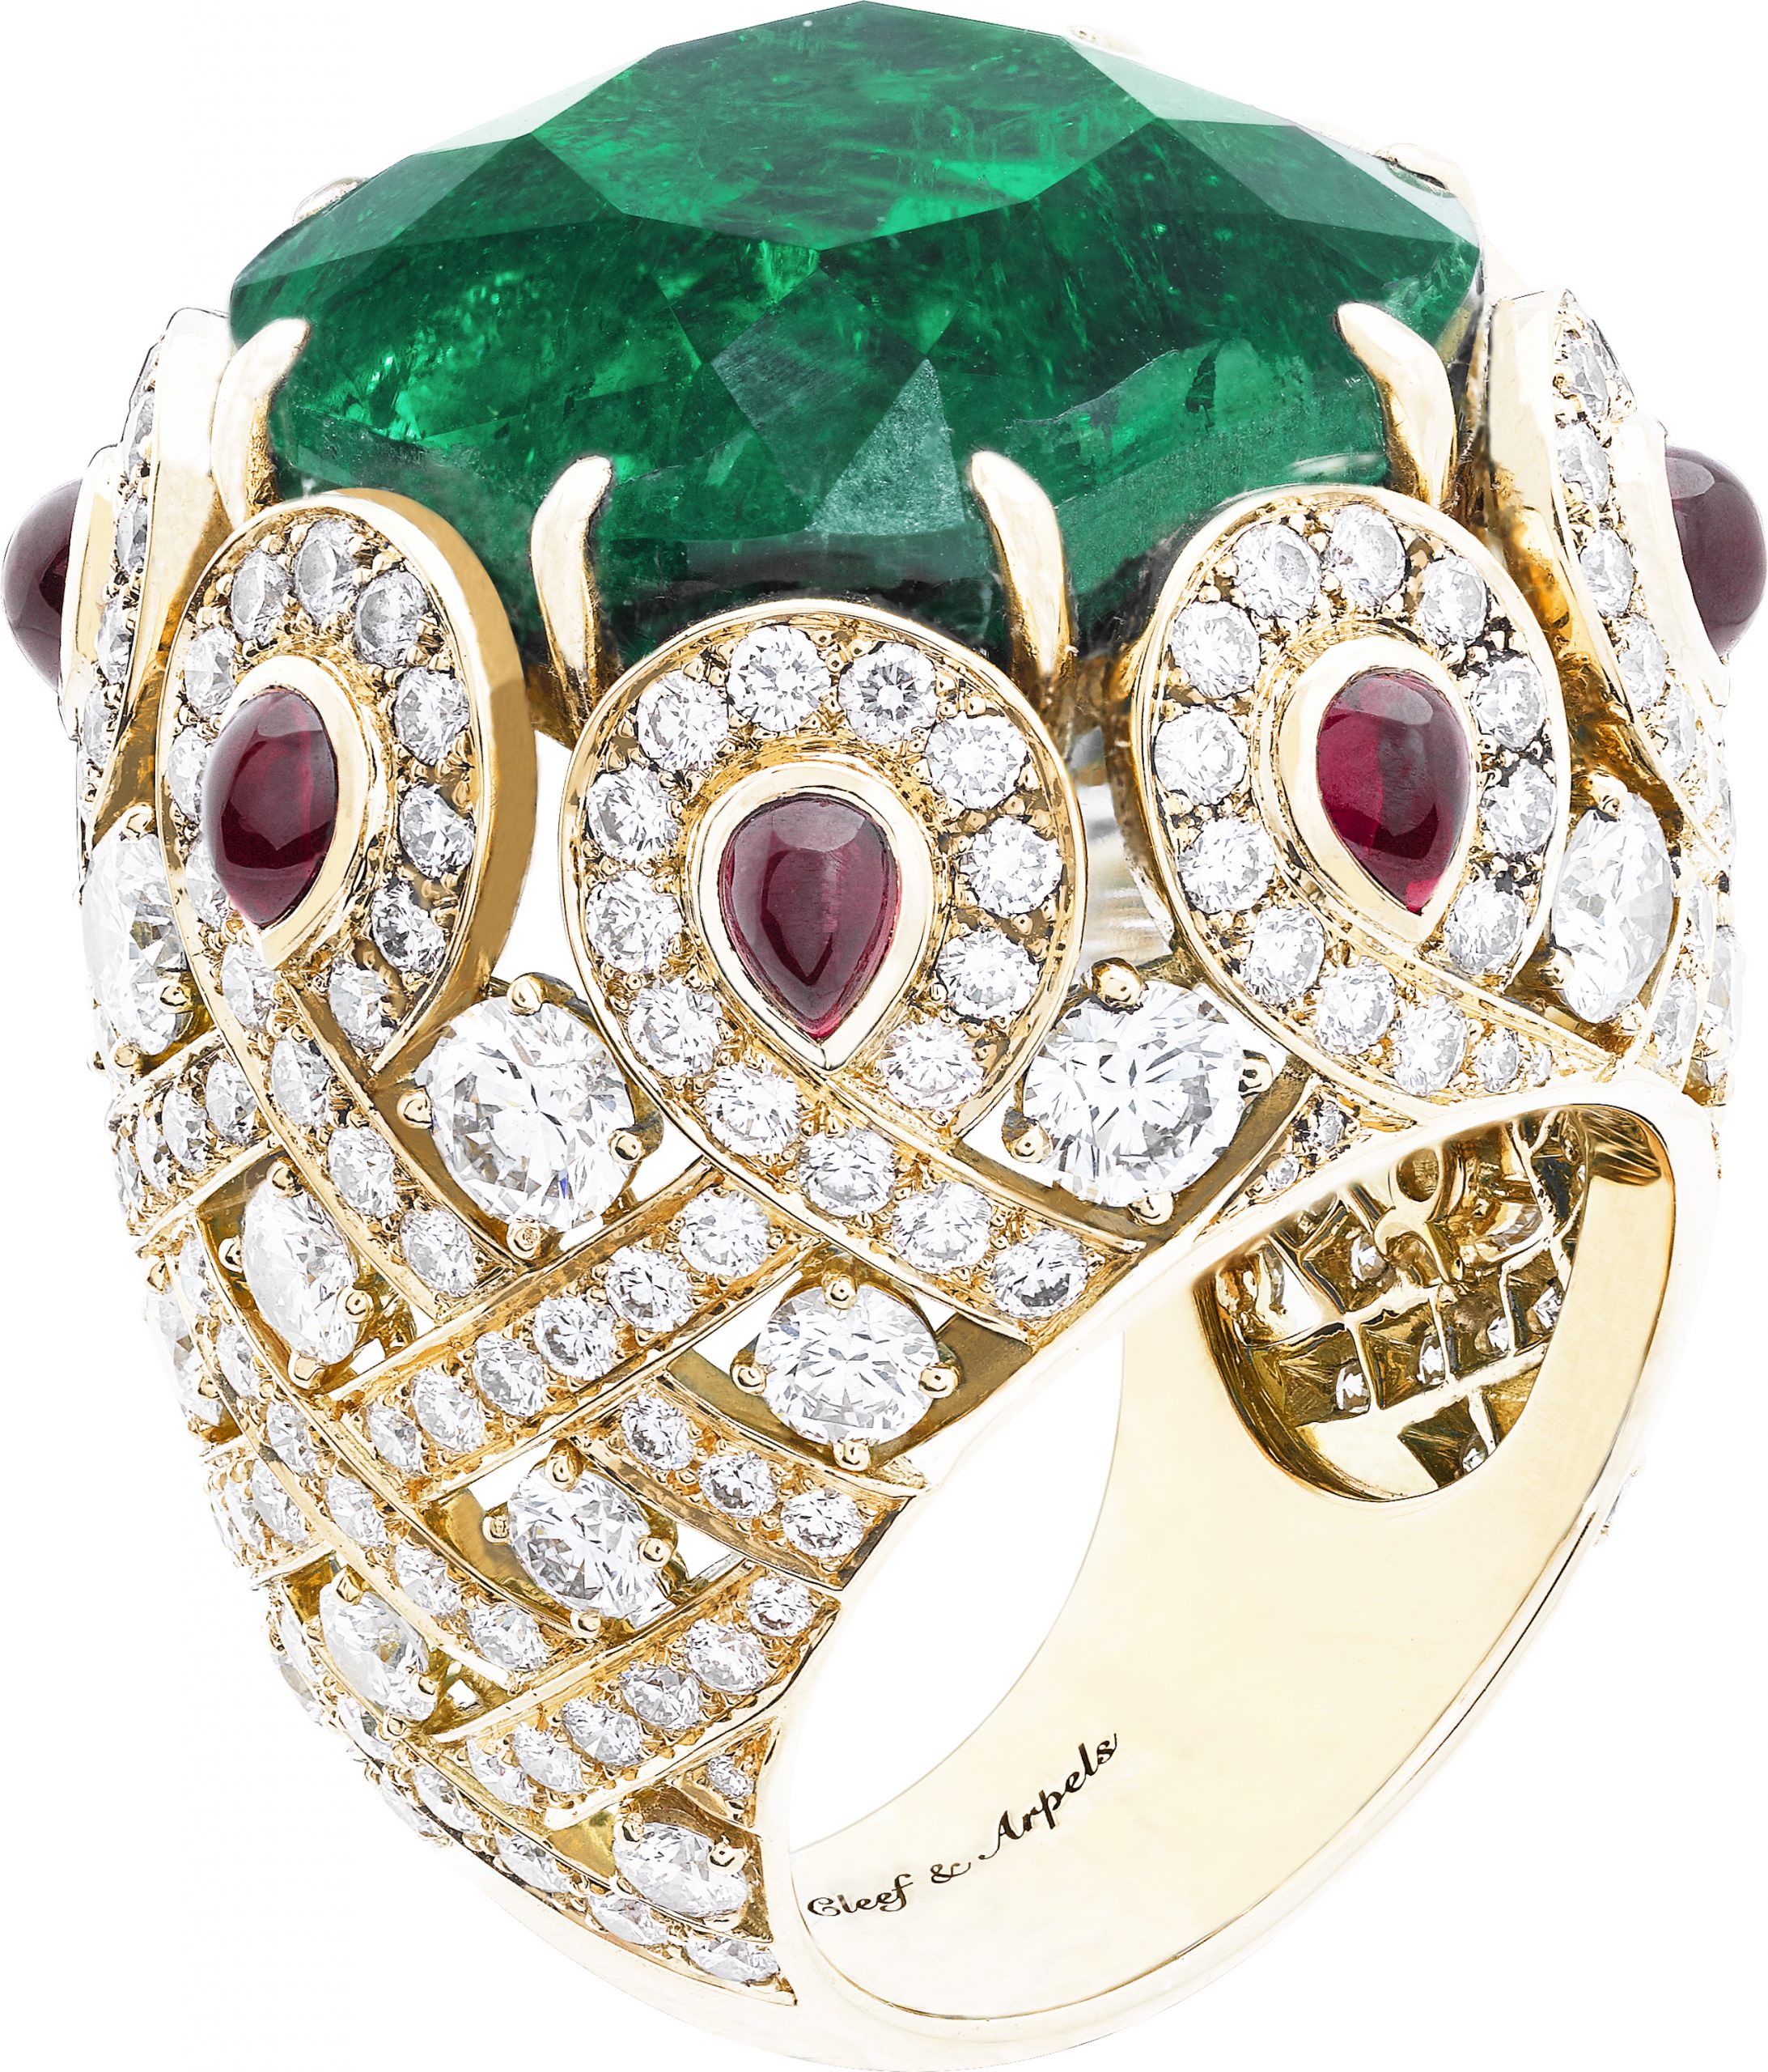 Van Cleef & Arpels launches new high jewellery collection Legends of  Diamonds - Something About Rocks